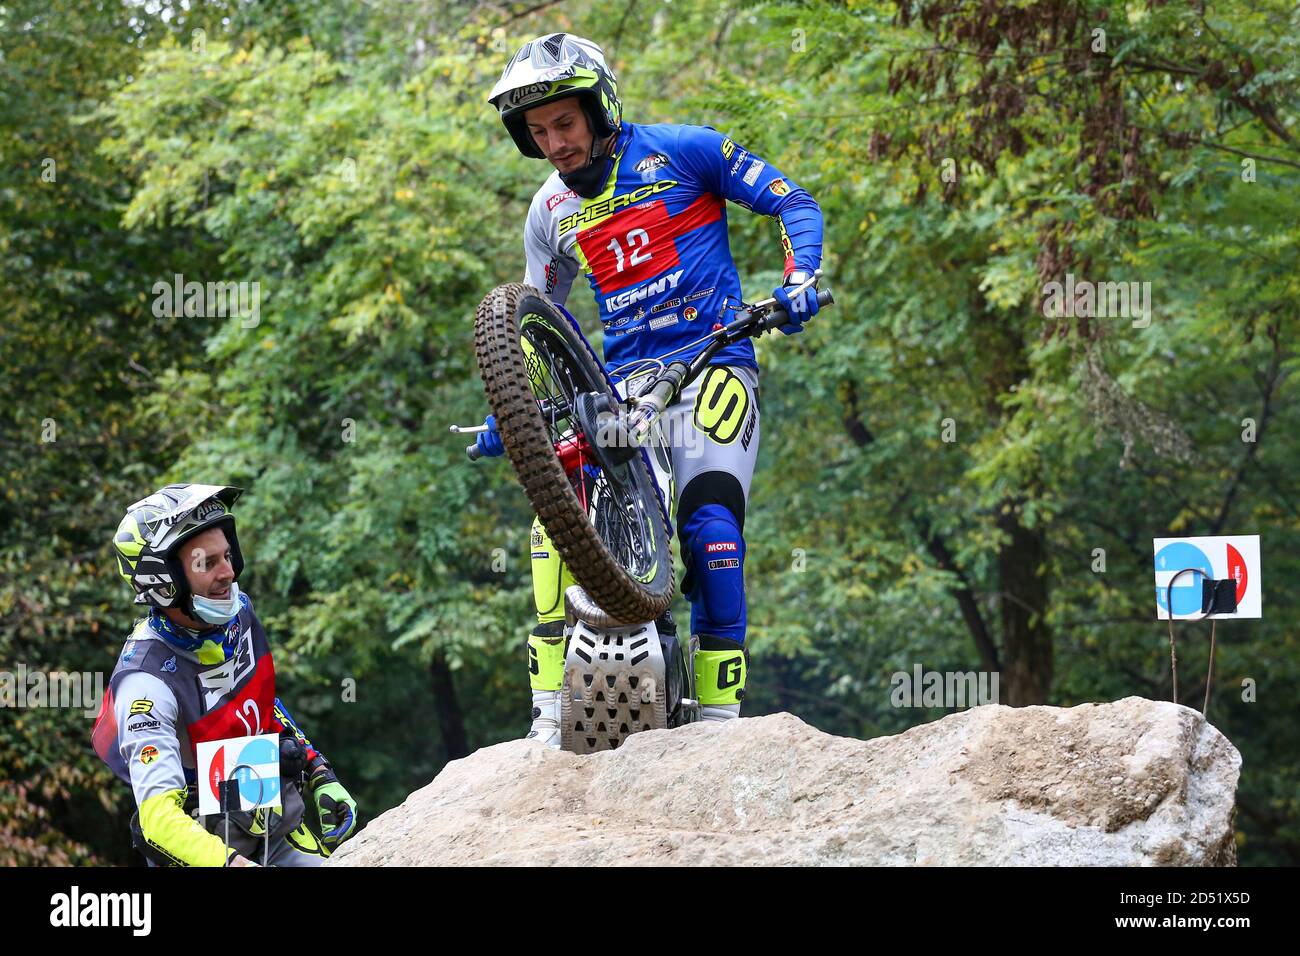 Jeroni Fajardo (Sherco / Trial GP) during the Hertz FIM Trial World Championship (round 4) at Moto Club Lazzate circuit on October 11, 2020 in Lazzate Stock Photo